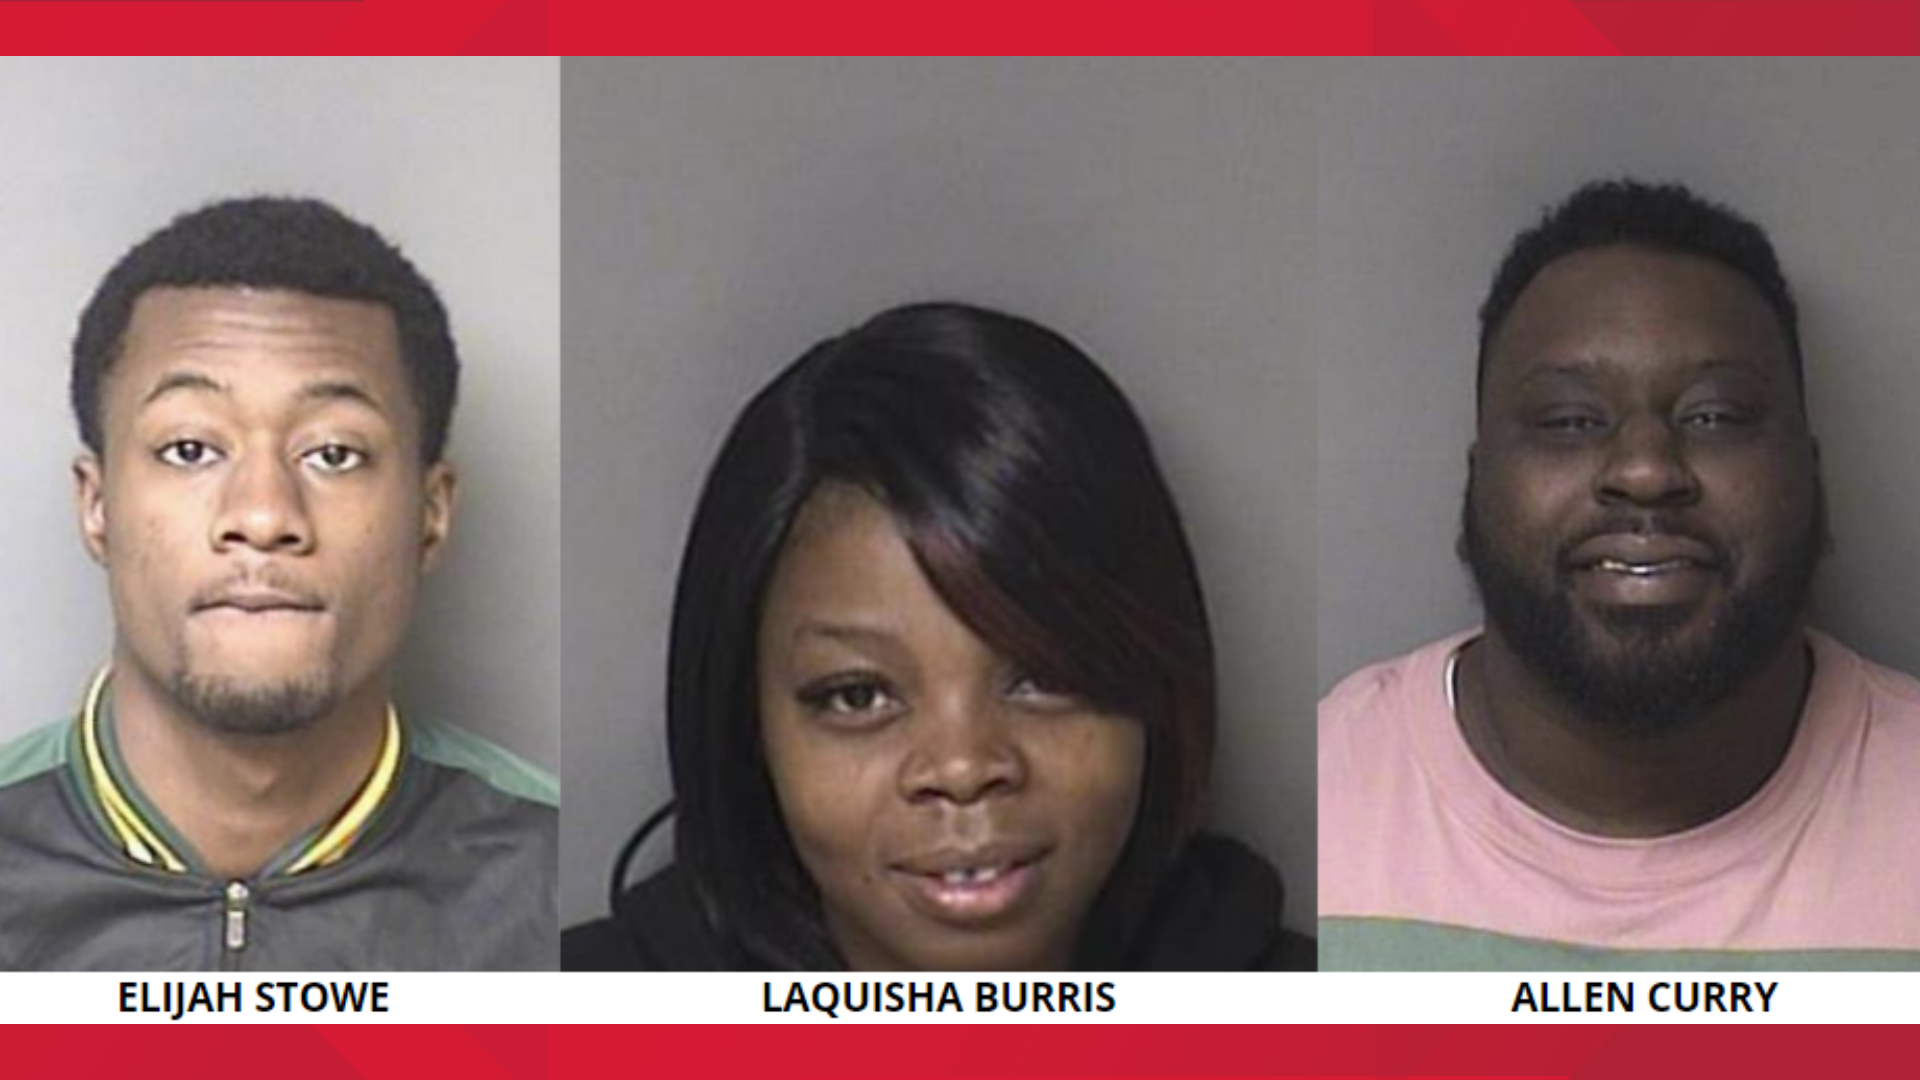 An employee was hit in the head with a bottle during the incident at the Gaston County QuickTrip. Three people have been charged in connection to the incident.